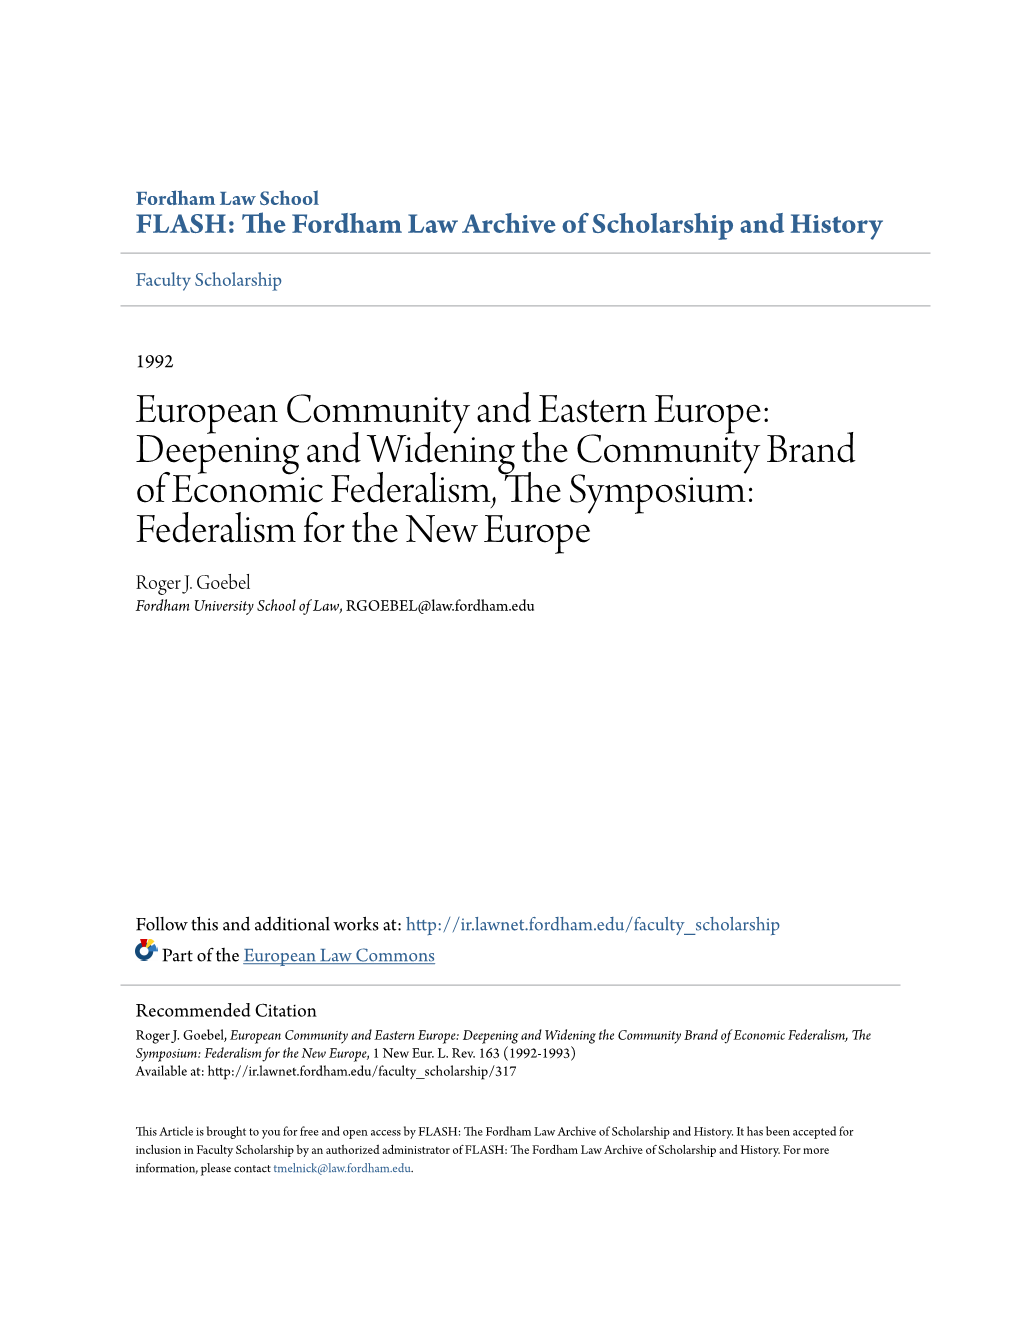 European Community and Eastern Europe: Deepening and Widening the Community Brand of Economic Federalism, the Ys Mposium: Federalism for the New Europe Roger J